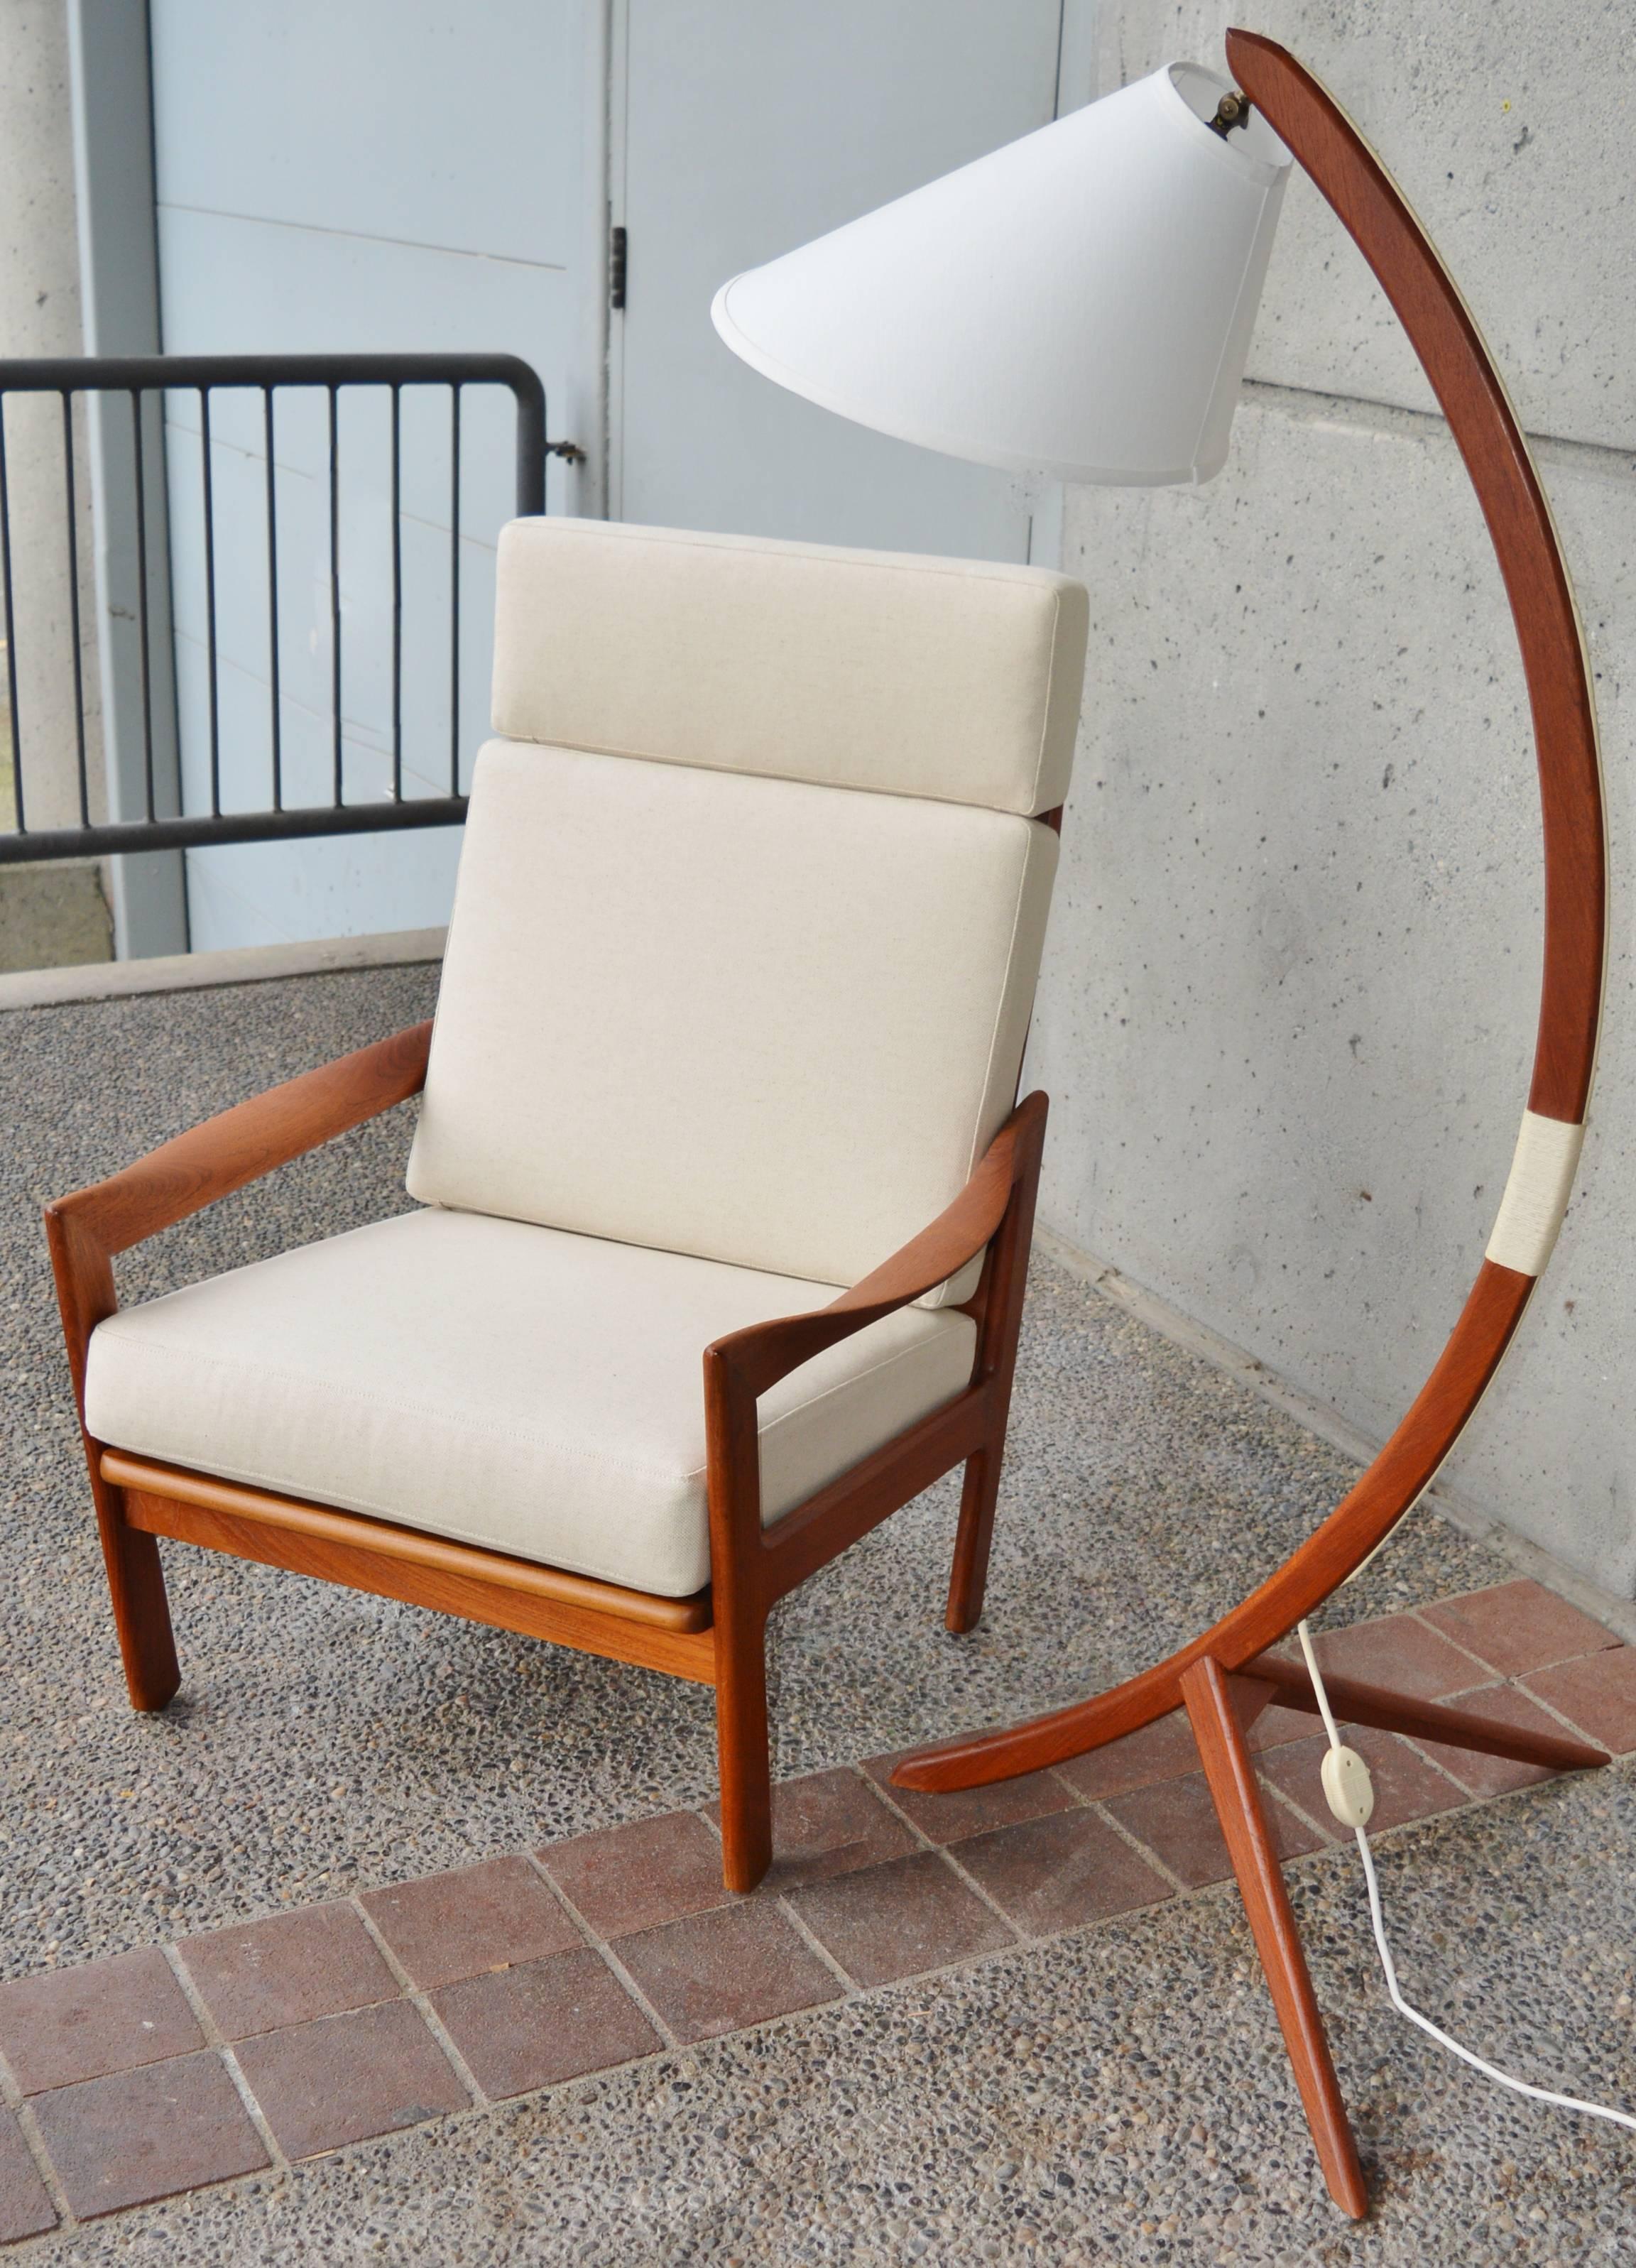 This gorgeous and rare Danish Modern teak frame restored lounge chair was designed by Illum Wikkelso for Niels Eilersen. Featuring ultra deep curved and flared arm rests, legs that tip toward the center and a tall back with sultry vertical back